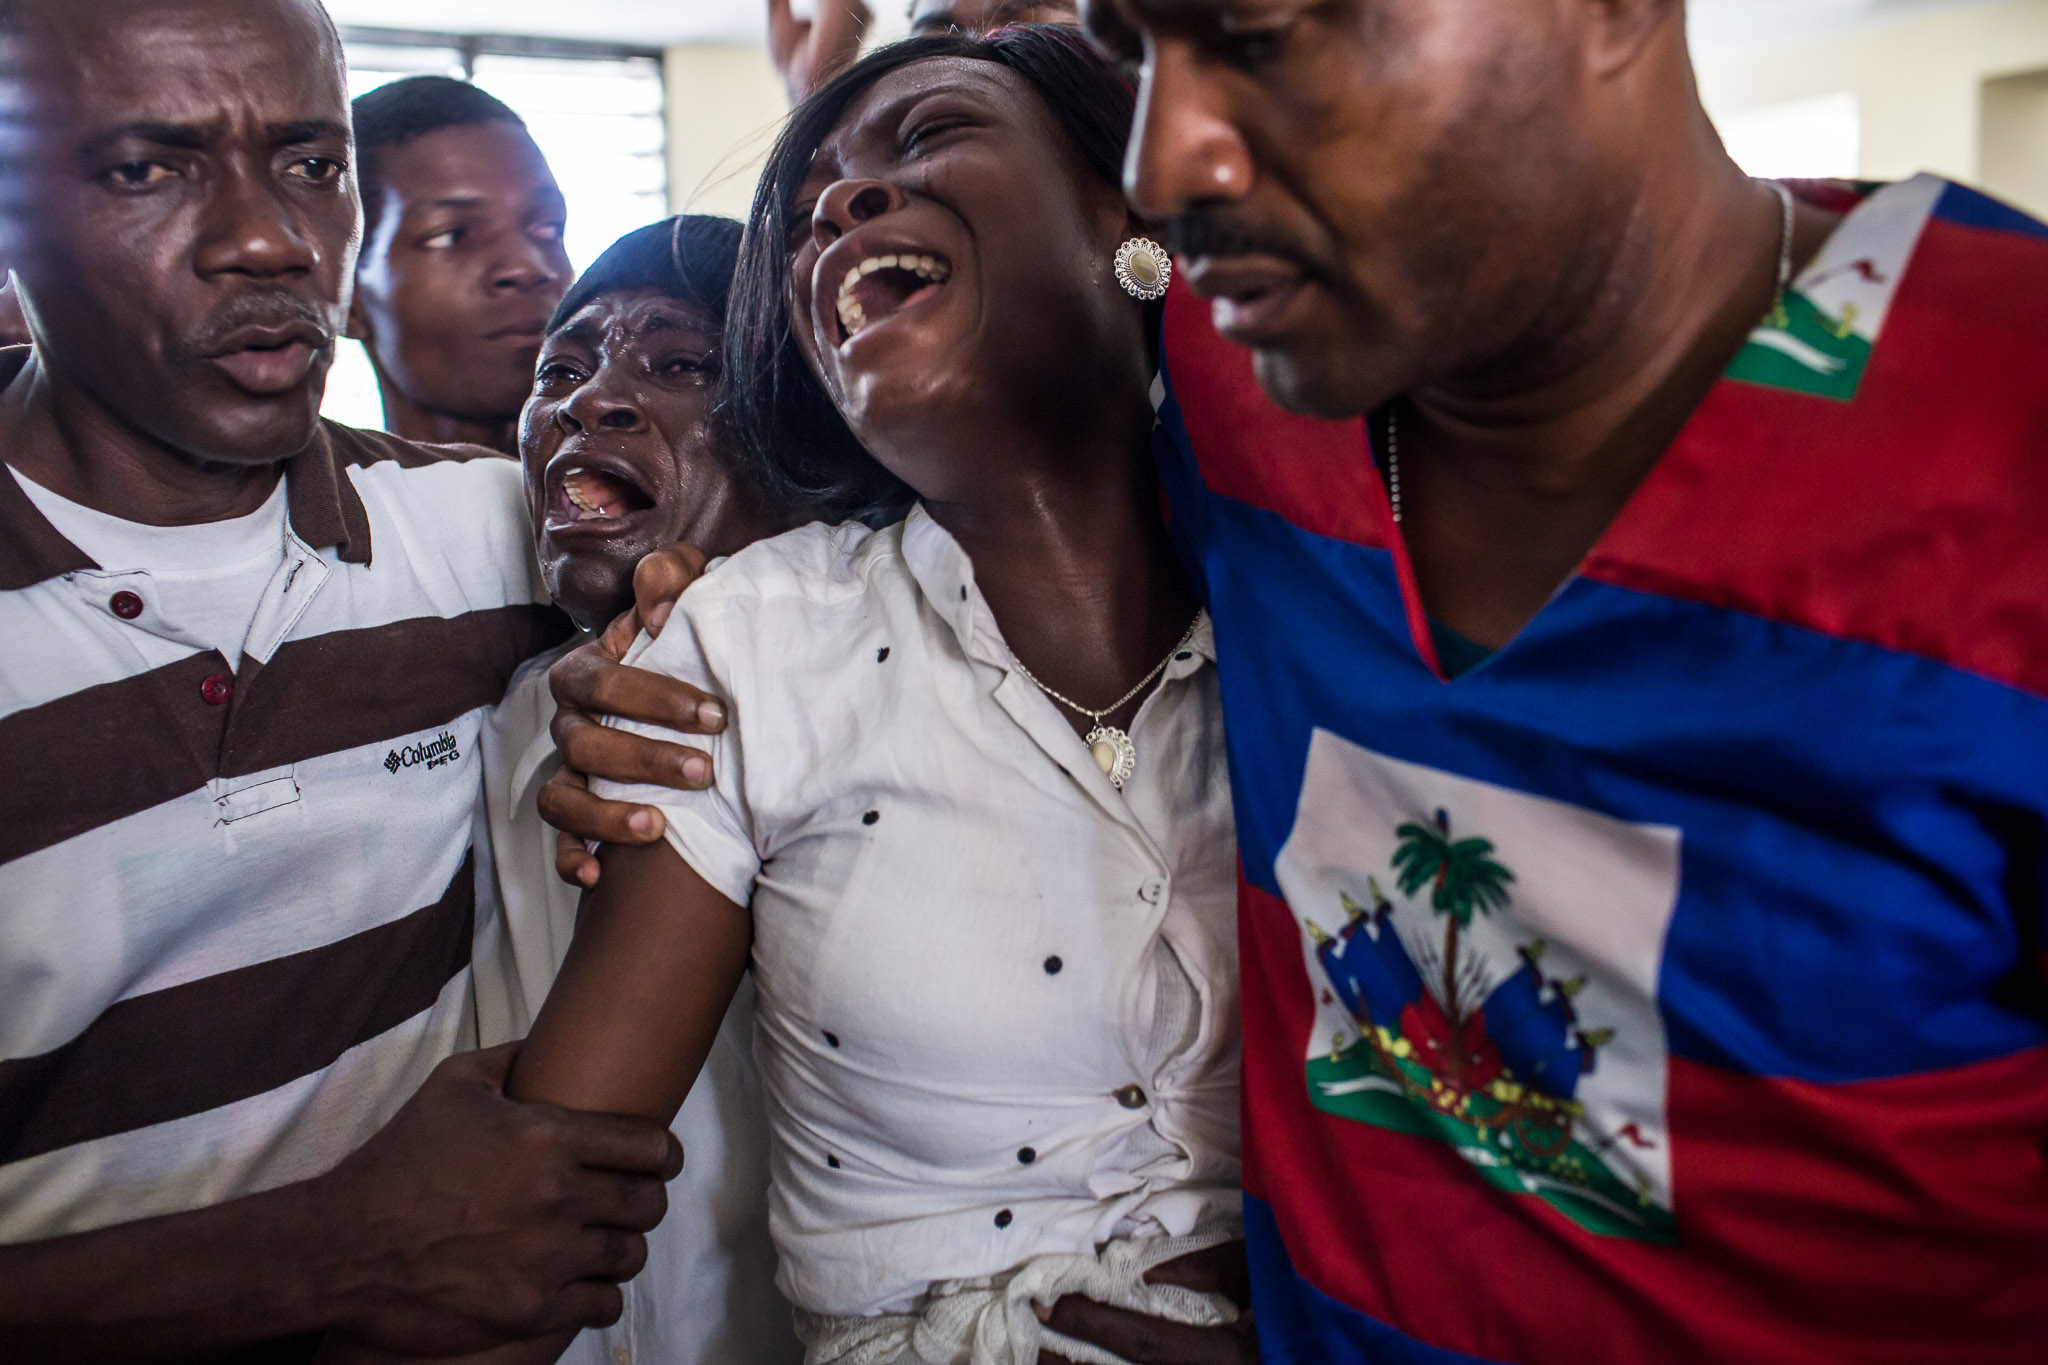  Claudiani Fonrose, third from left, and Bertha Nicolas, 20, second from right, grieve at the funeral of Jolin Nicolas, 19, on Monday, December 22, 2014 in Port-au-Prince, Haiti. Jolin Nicolas, their son and brother, respectively, was killed by polic